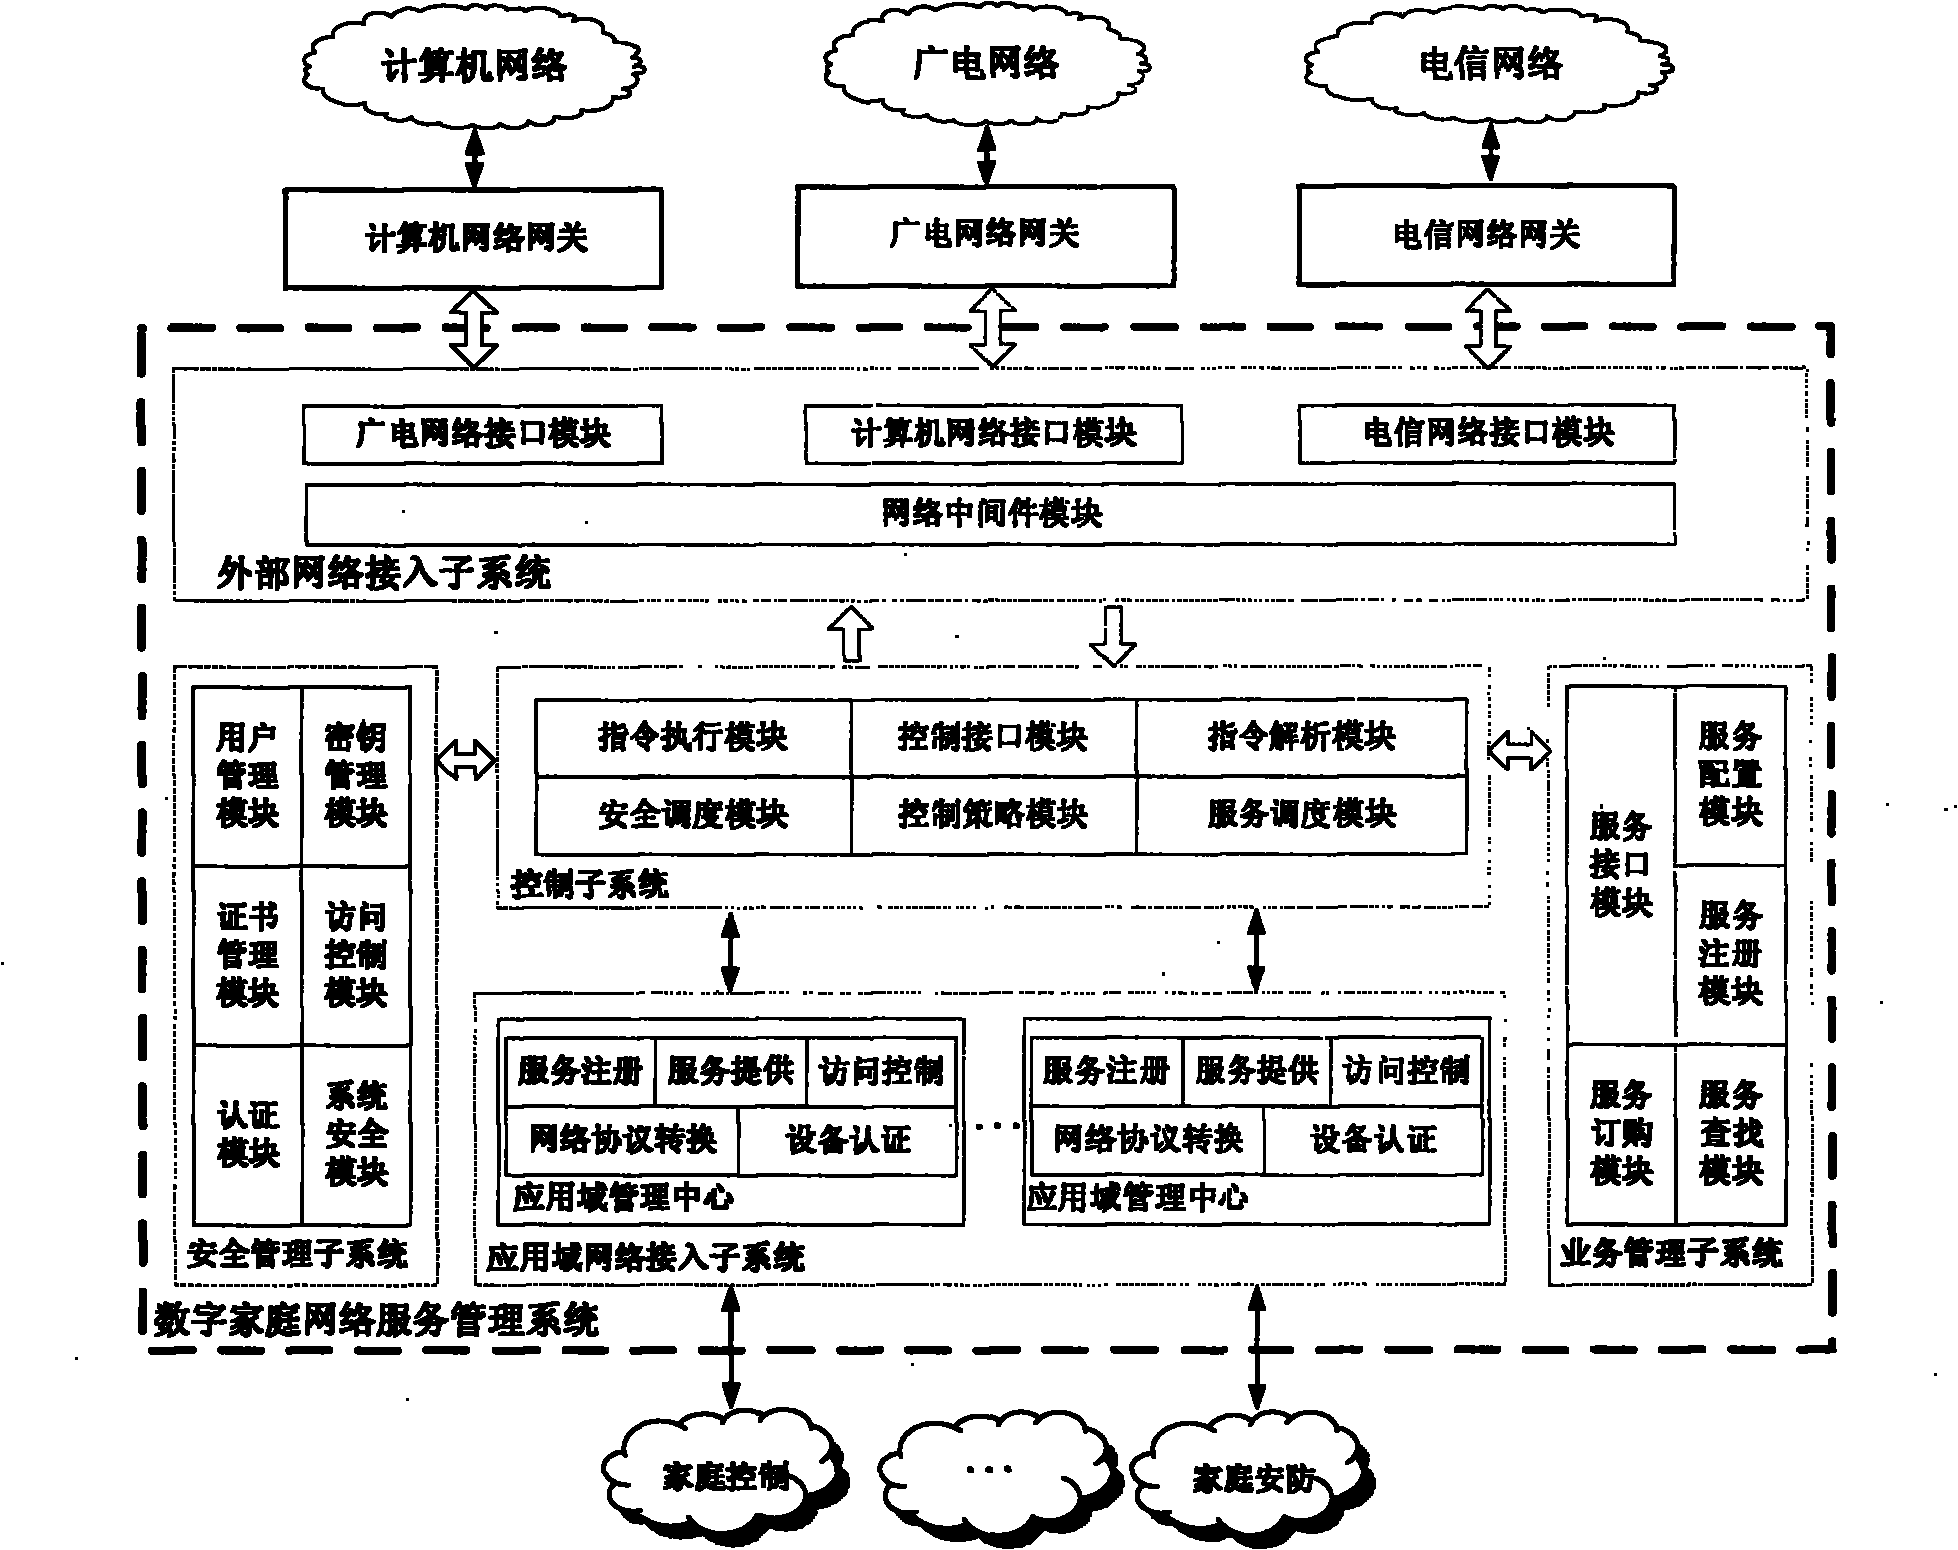 Three-network convergence-oriented digital home network service management system and method